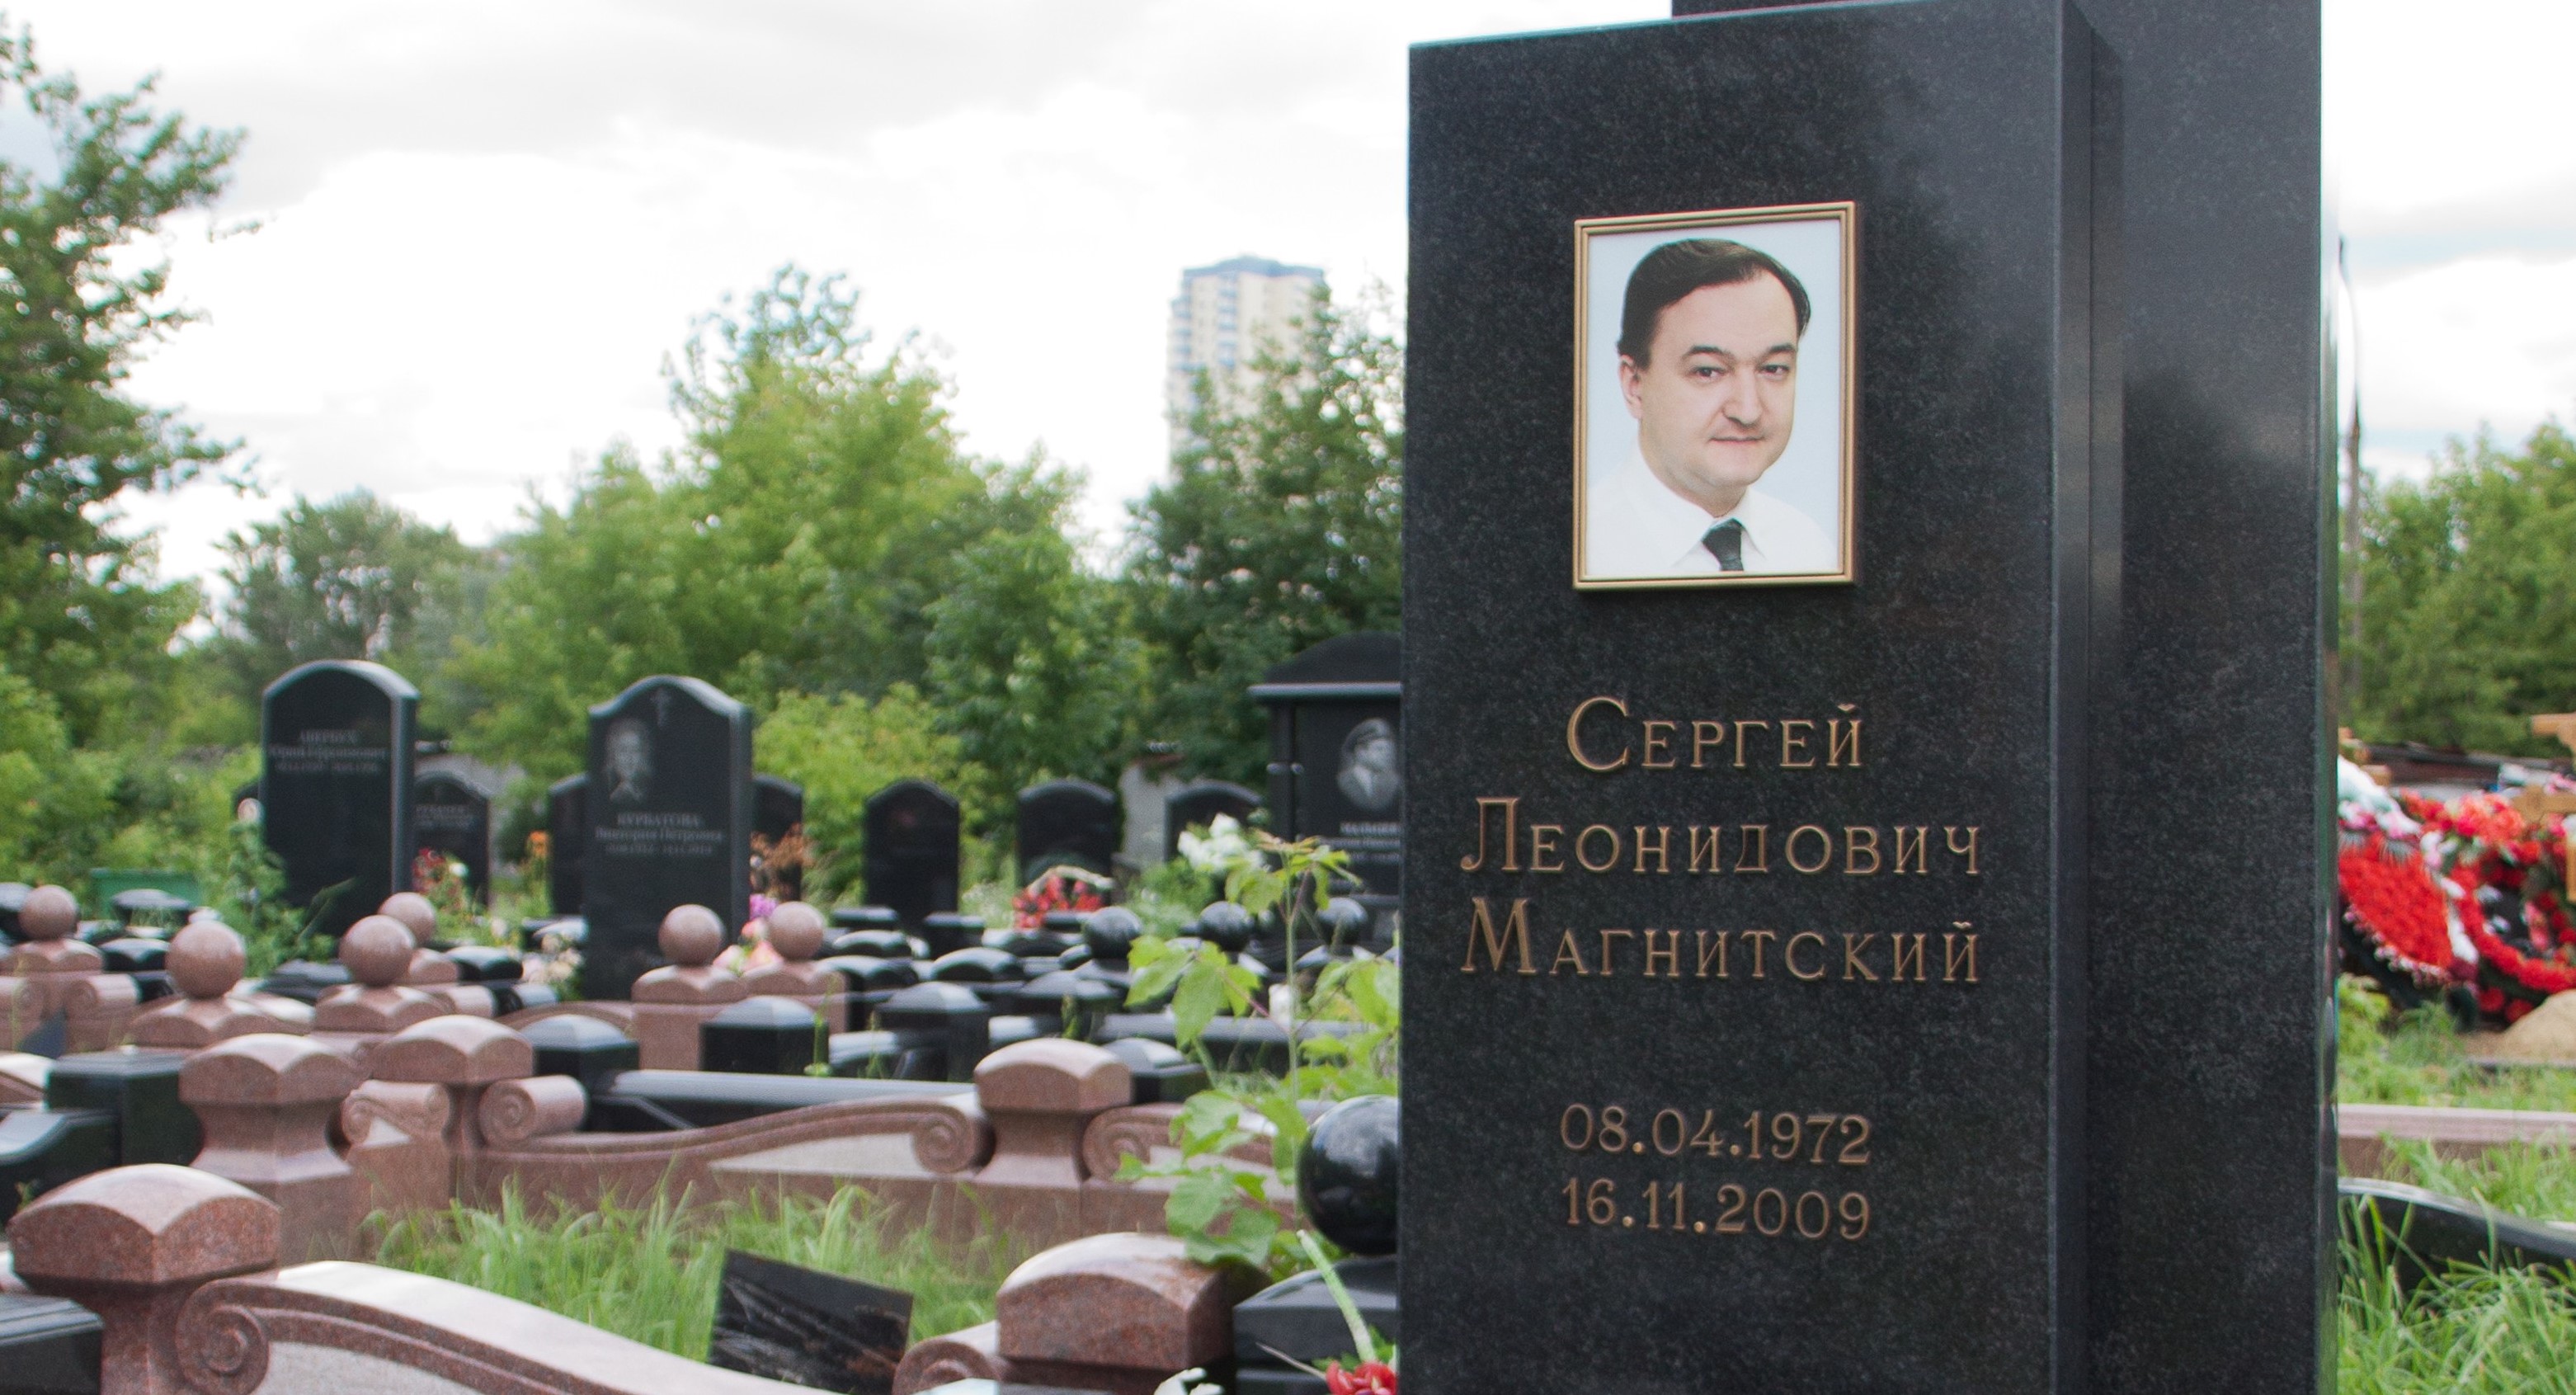 Europe rights court finds Russia denied Sergei Magnitsky basic rights